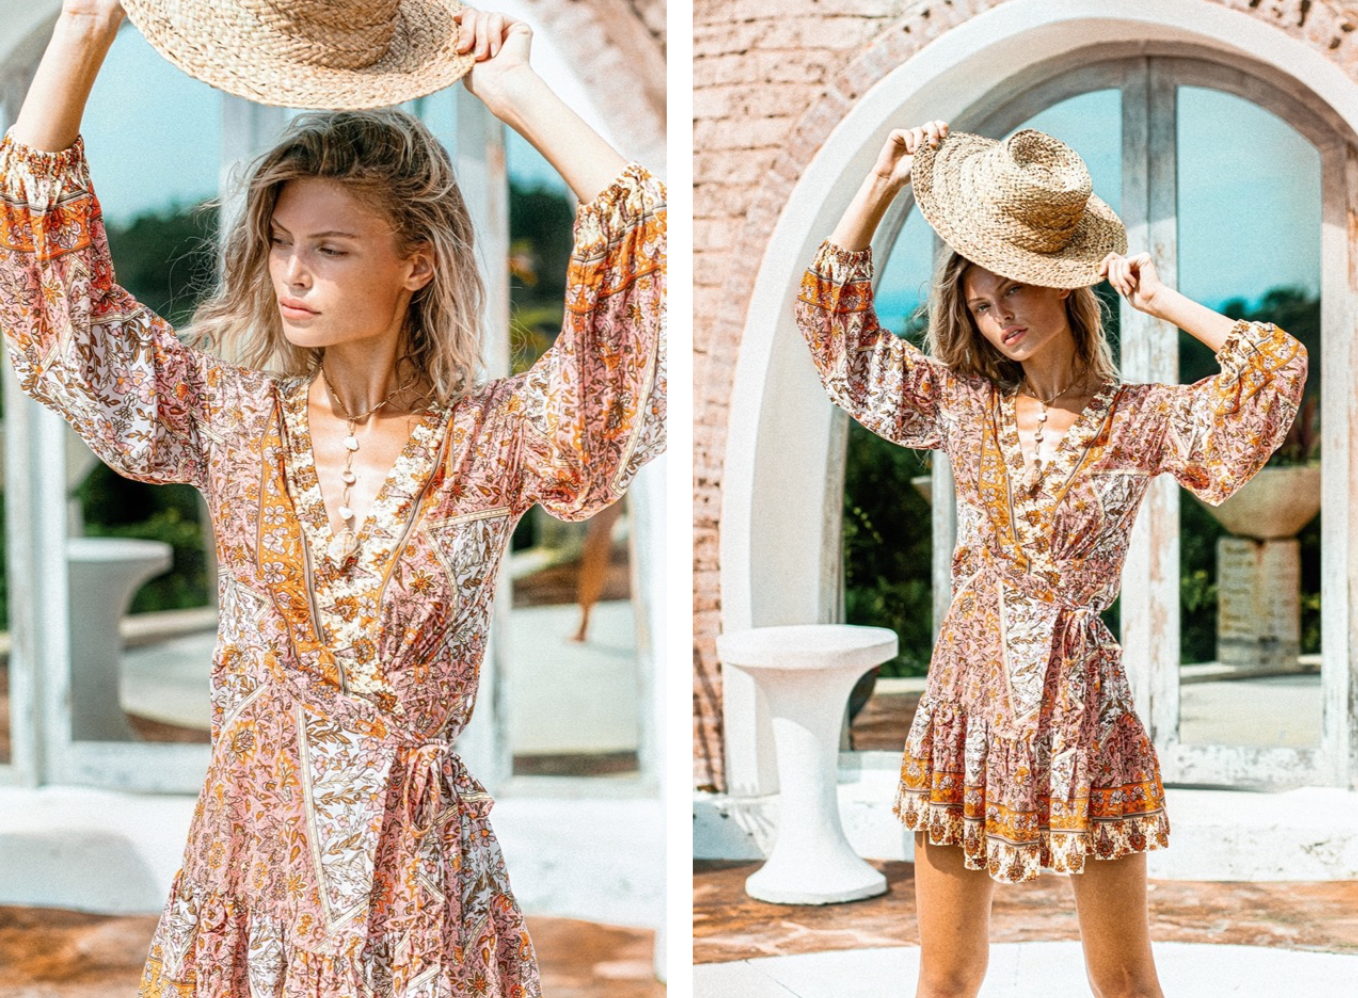 Welcoming our sun kissed love: Le Salty Label